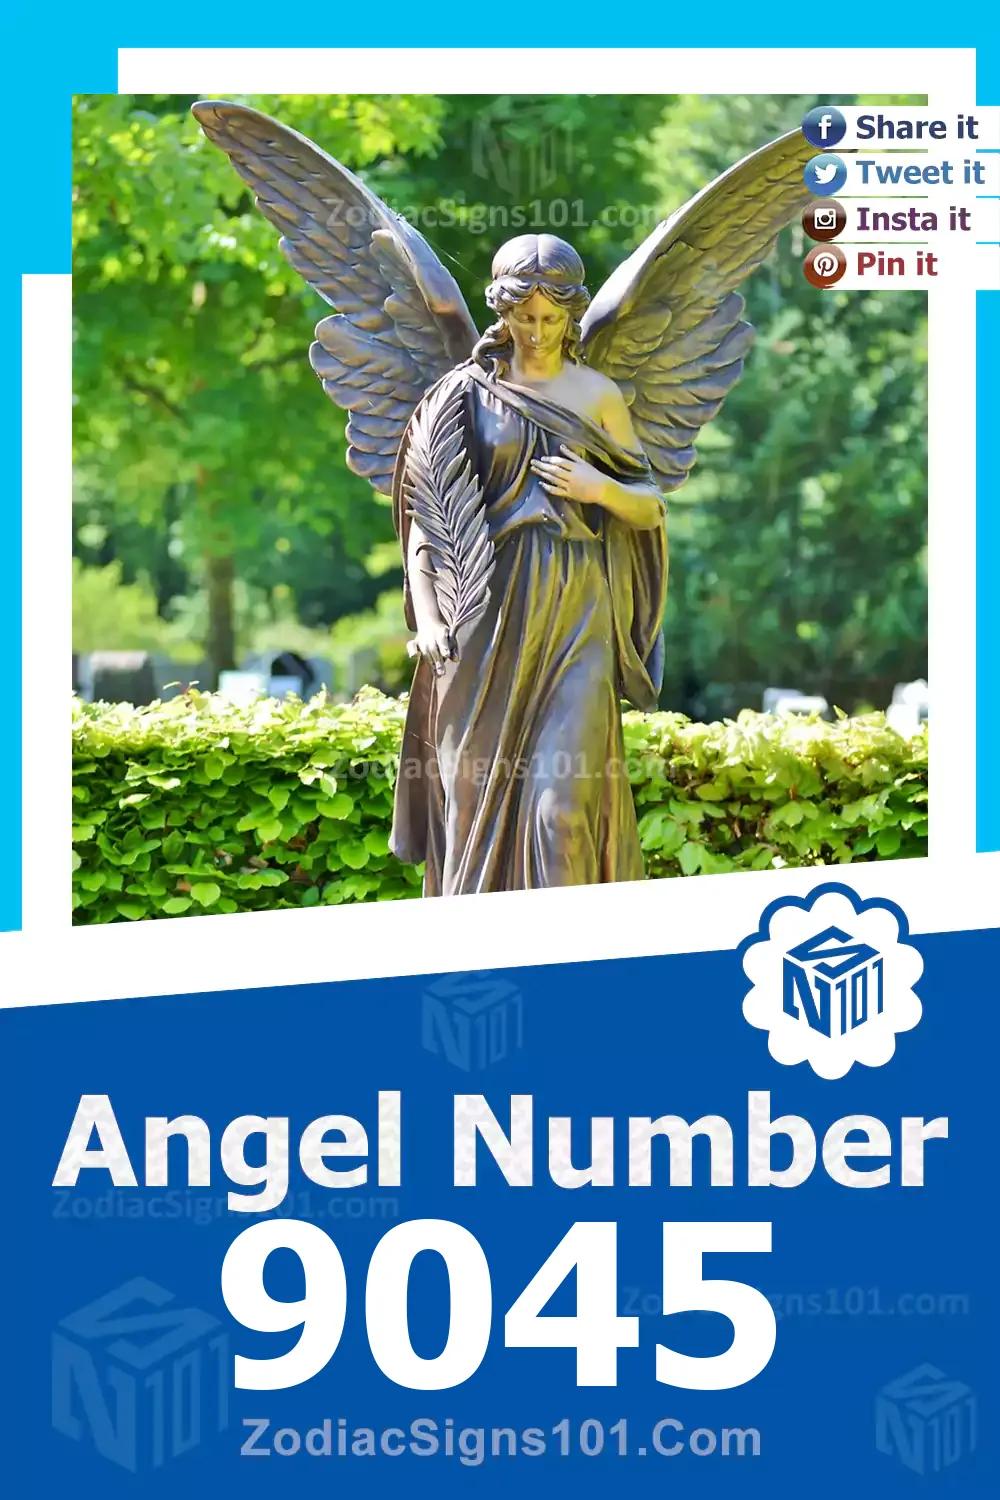 9045 Angel Number Meaning